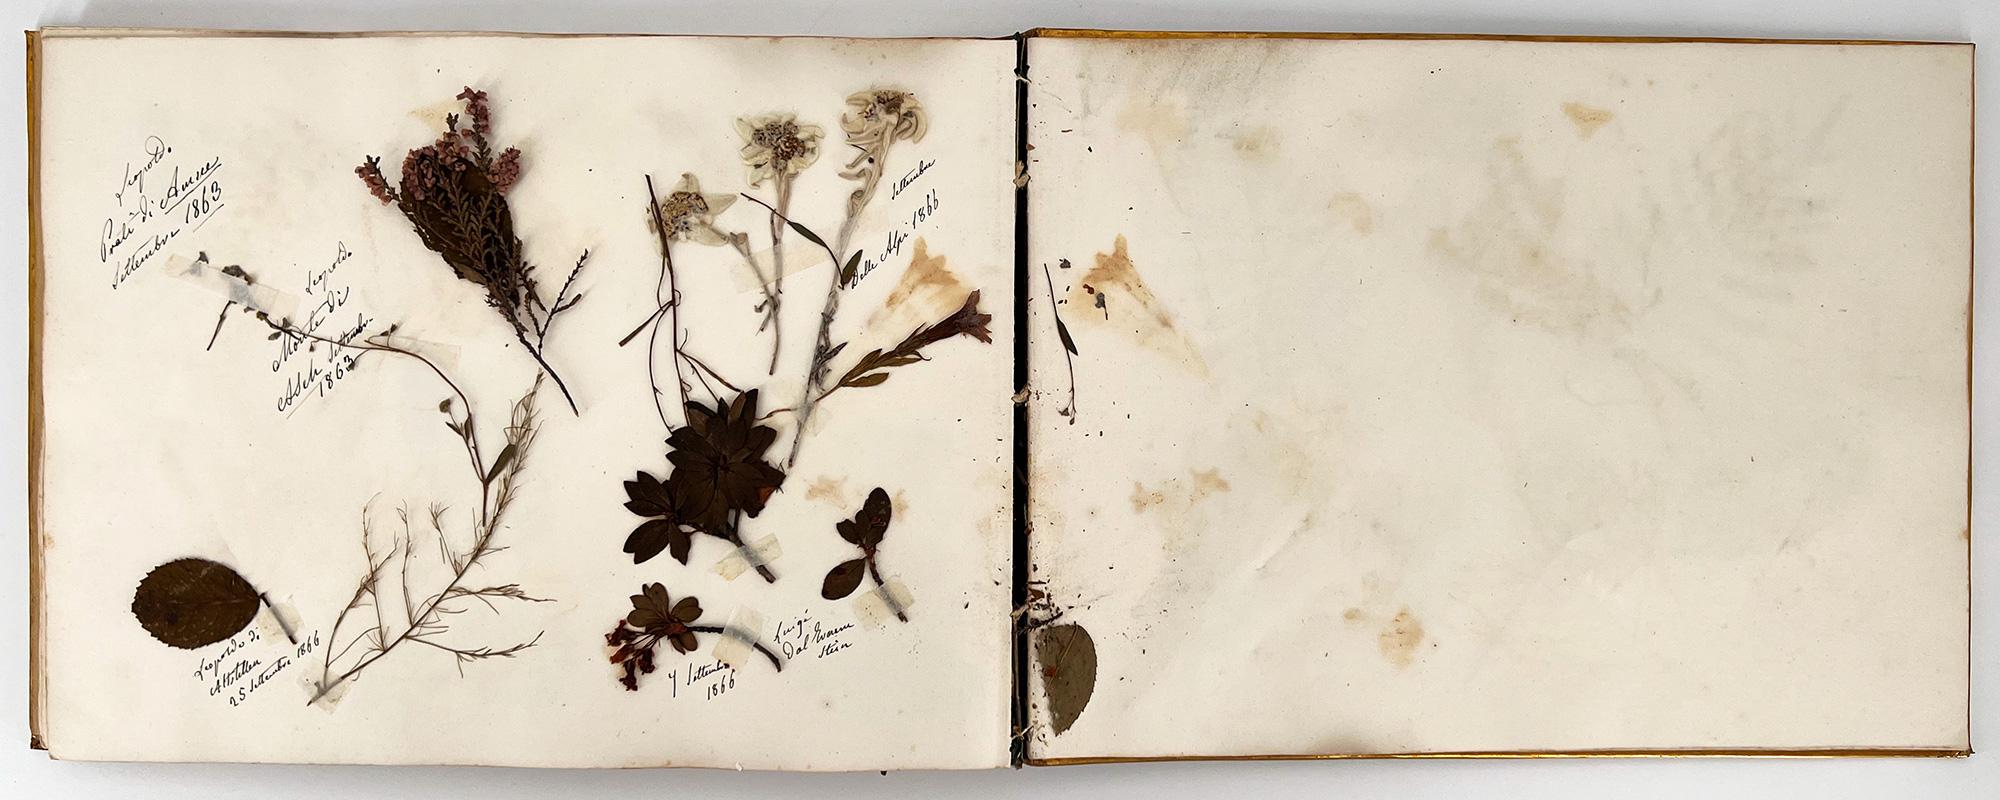 19th Century Album Containing Drawings, Memorabilia, and Botanical Samples For Sale 1